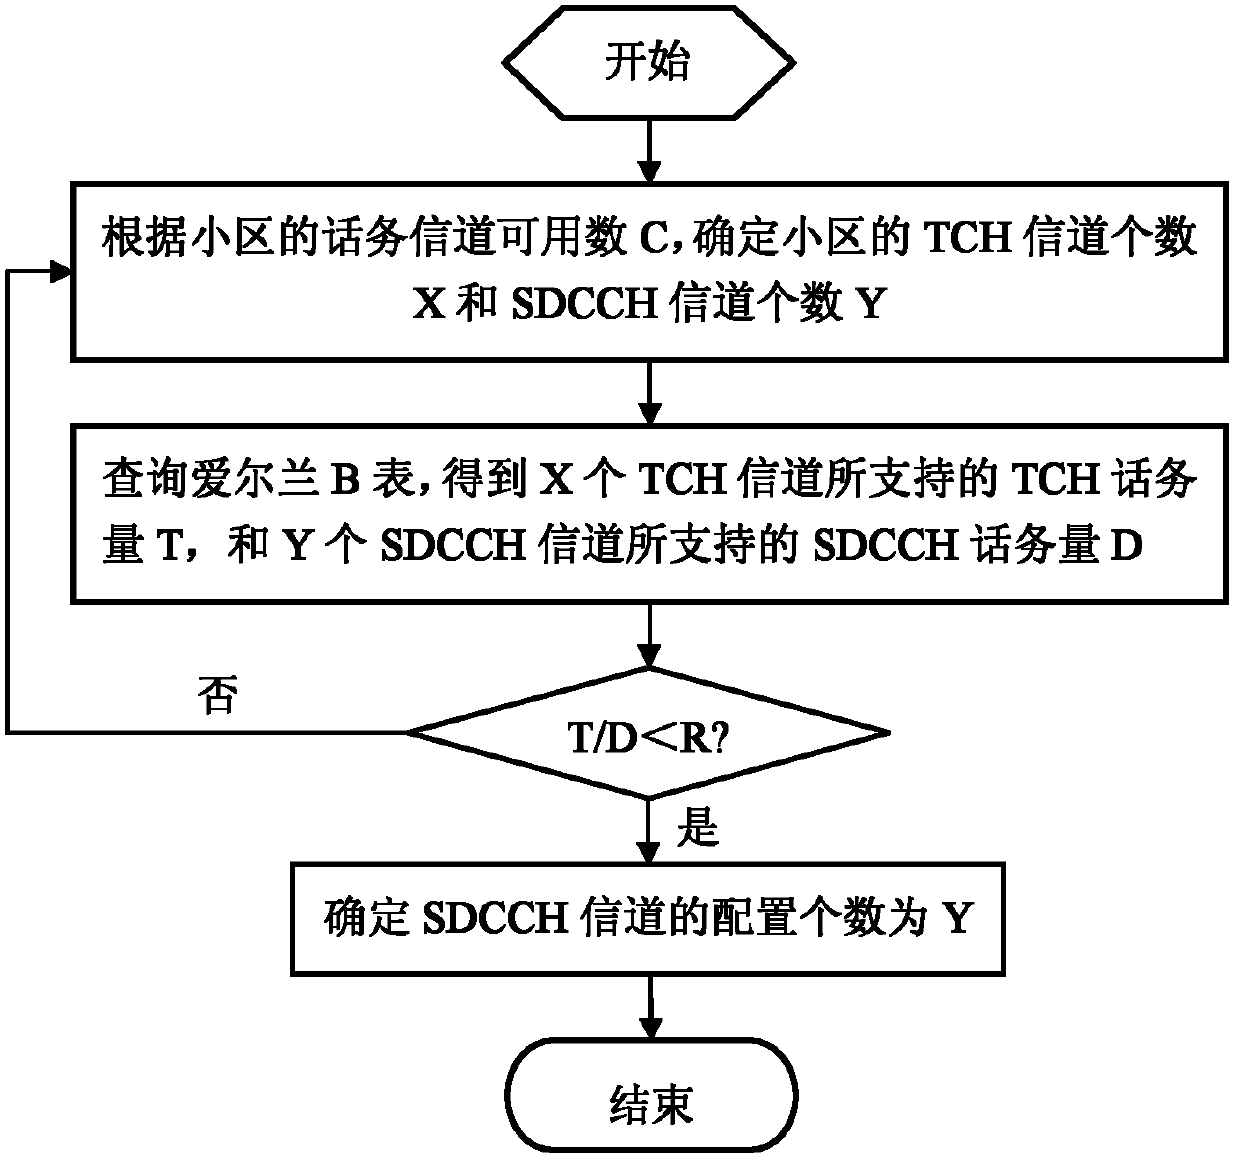 Standalone dedicated control channel (SDCCH) configuration method